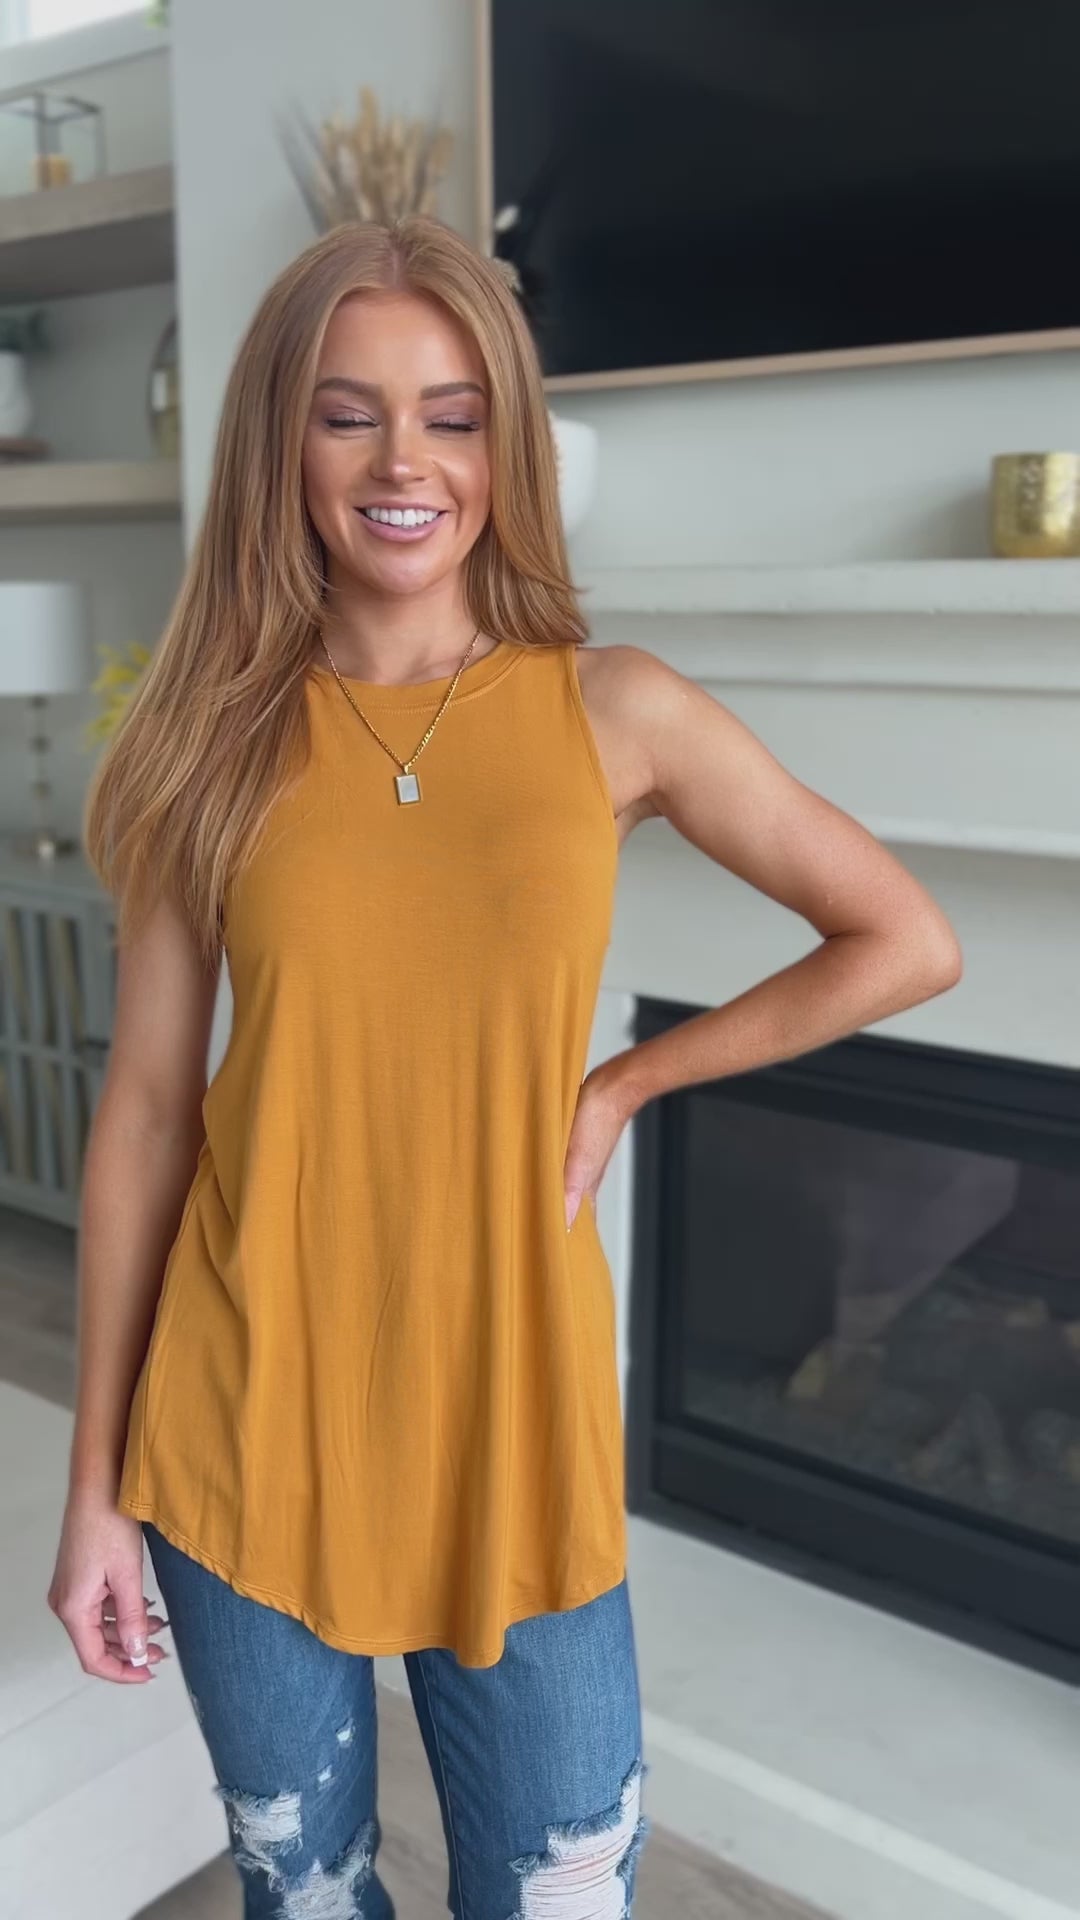 Can't Wait for Spring Hi-Low Sleeveless Top in Mustard